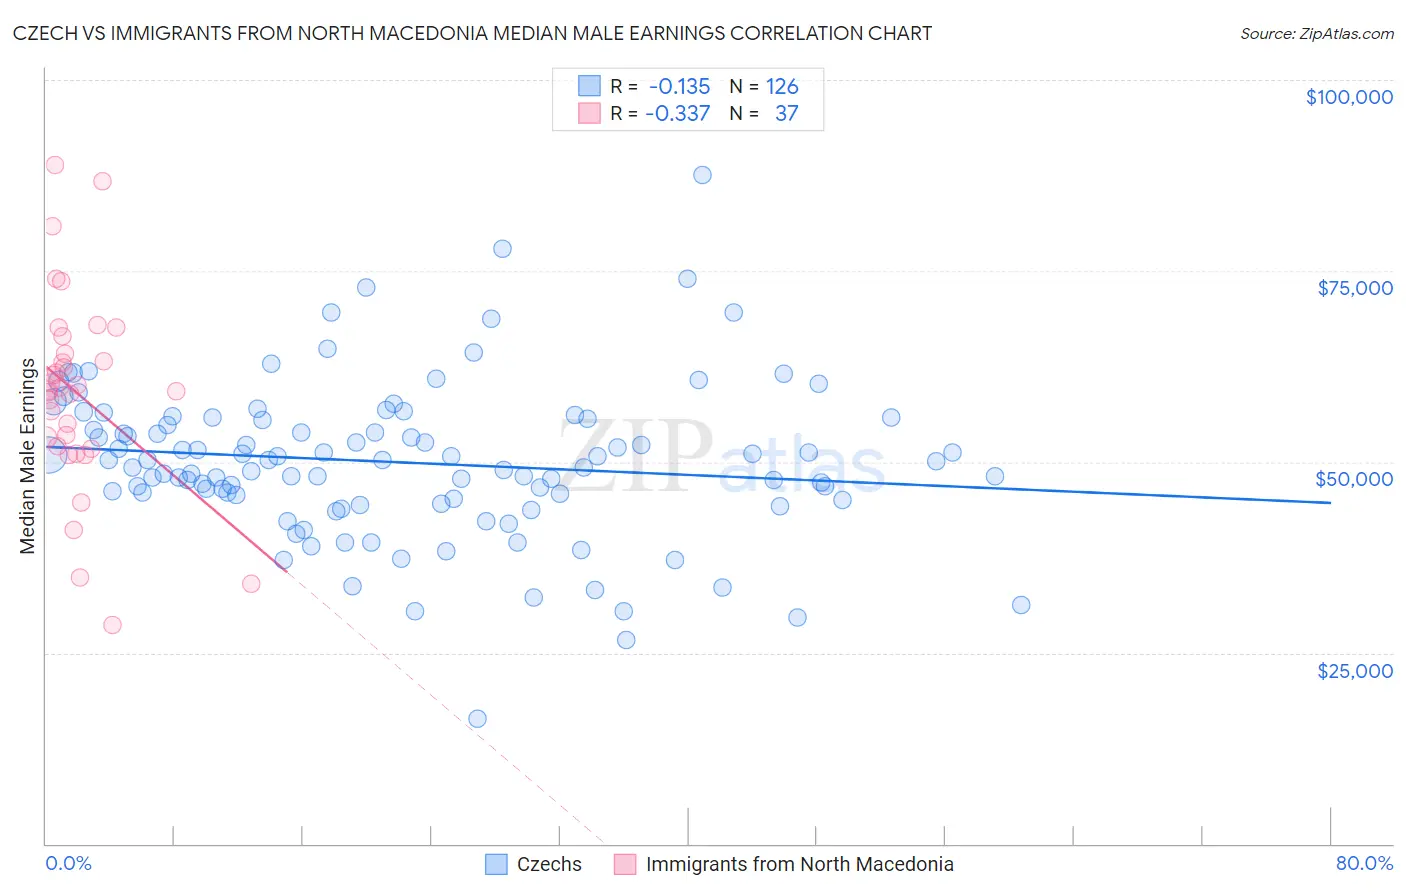 Czech vs Immigrants from North Macedonia Median Male Earnings